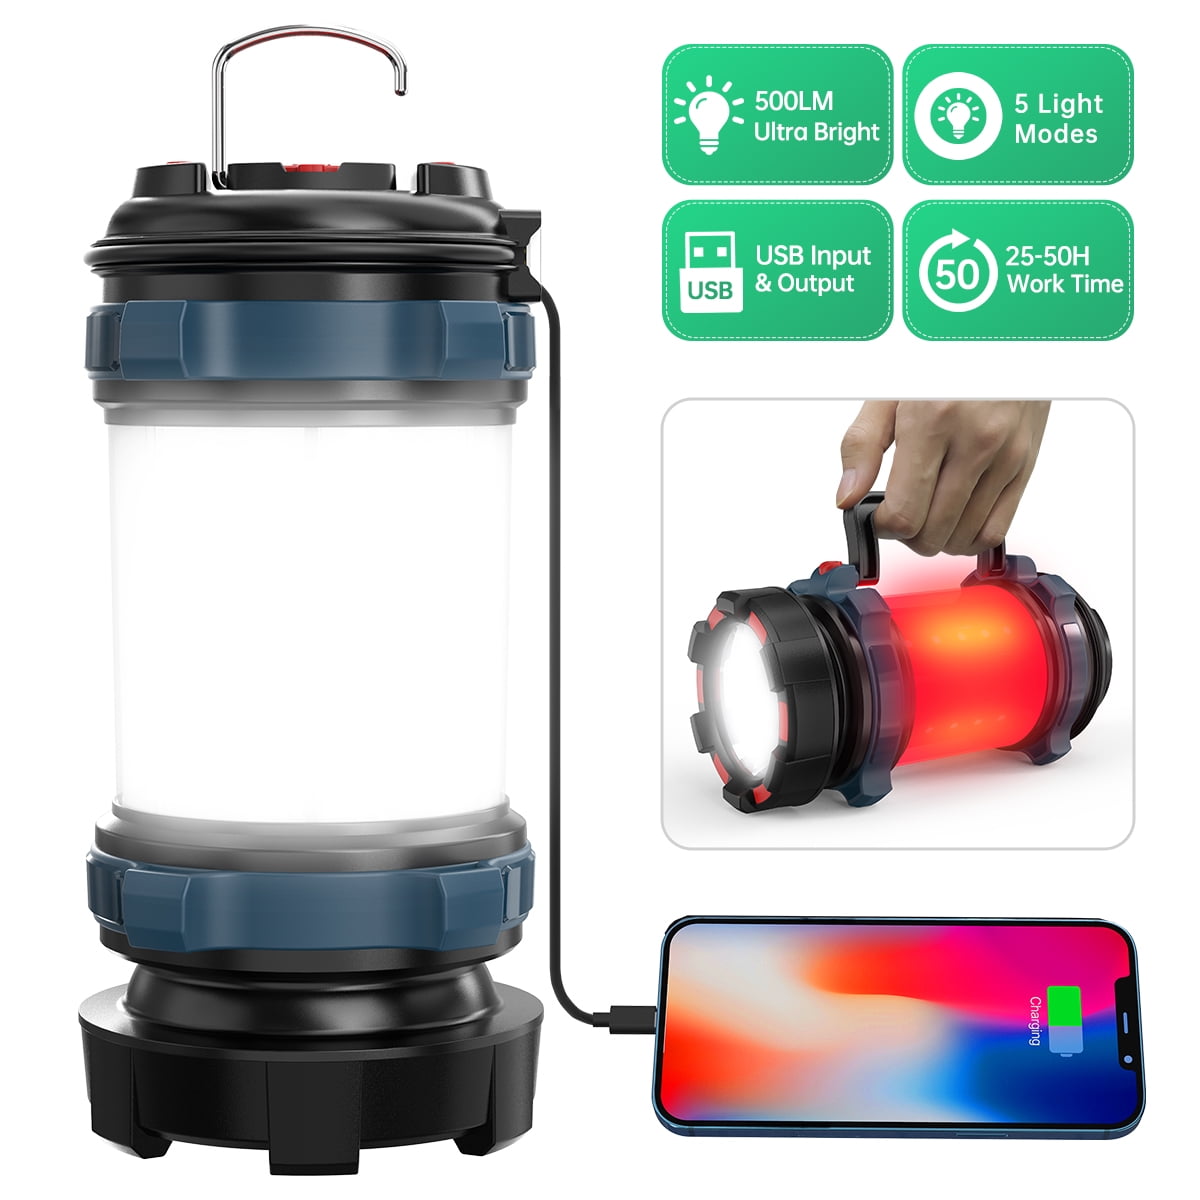 Rechargeable Portable Outdoor 5 Modes LED Camping Lantern Flashlight Waterproof